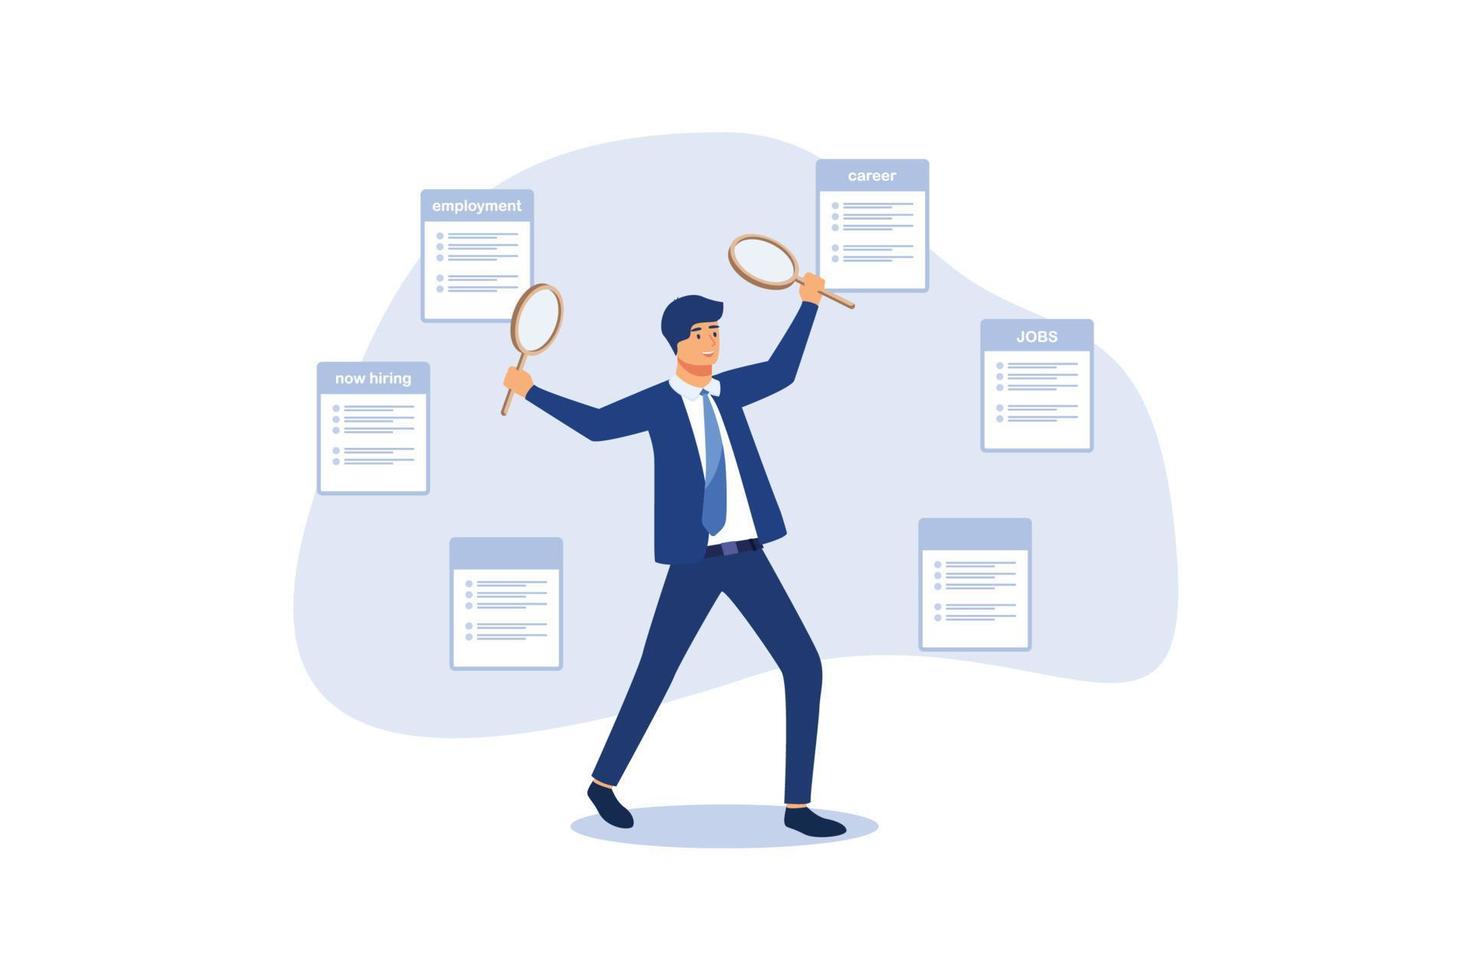 Job seeking, search for new career and opportunity, smart businessman using magnifying glass in both hands searching for new hiring career. flat vector illustration